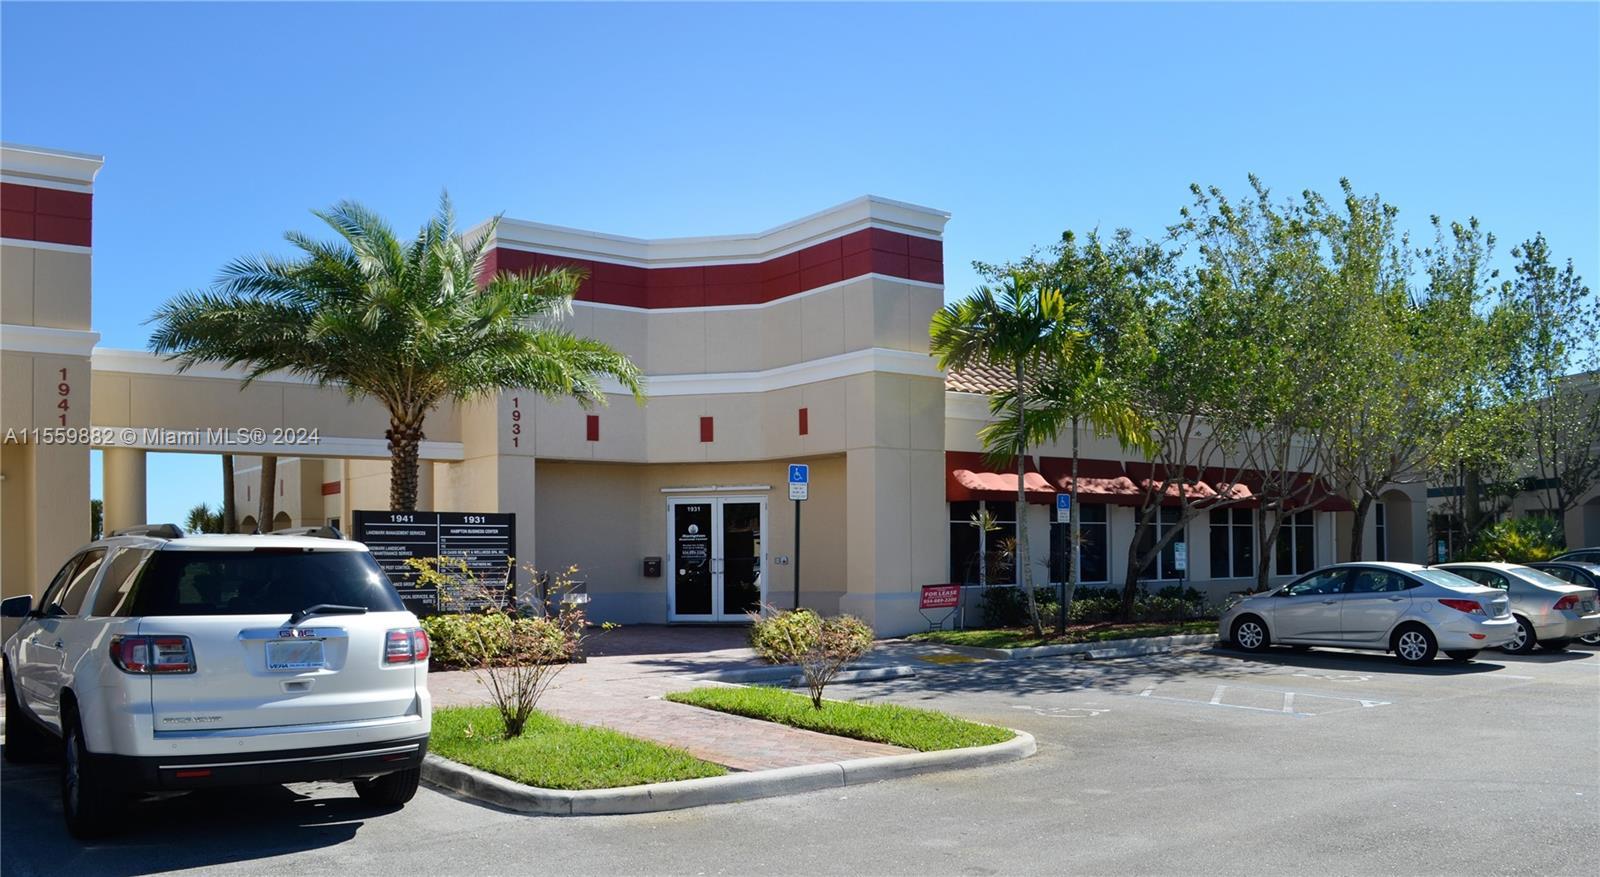 Photo of 1931 NW 150th Ave #109 in Pembroke Pines, FL